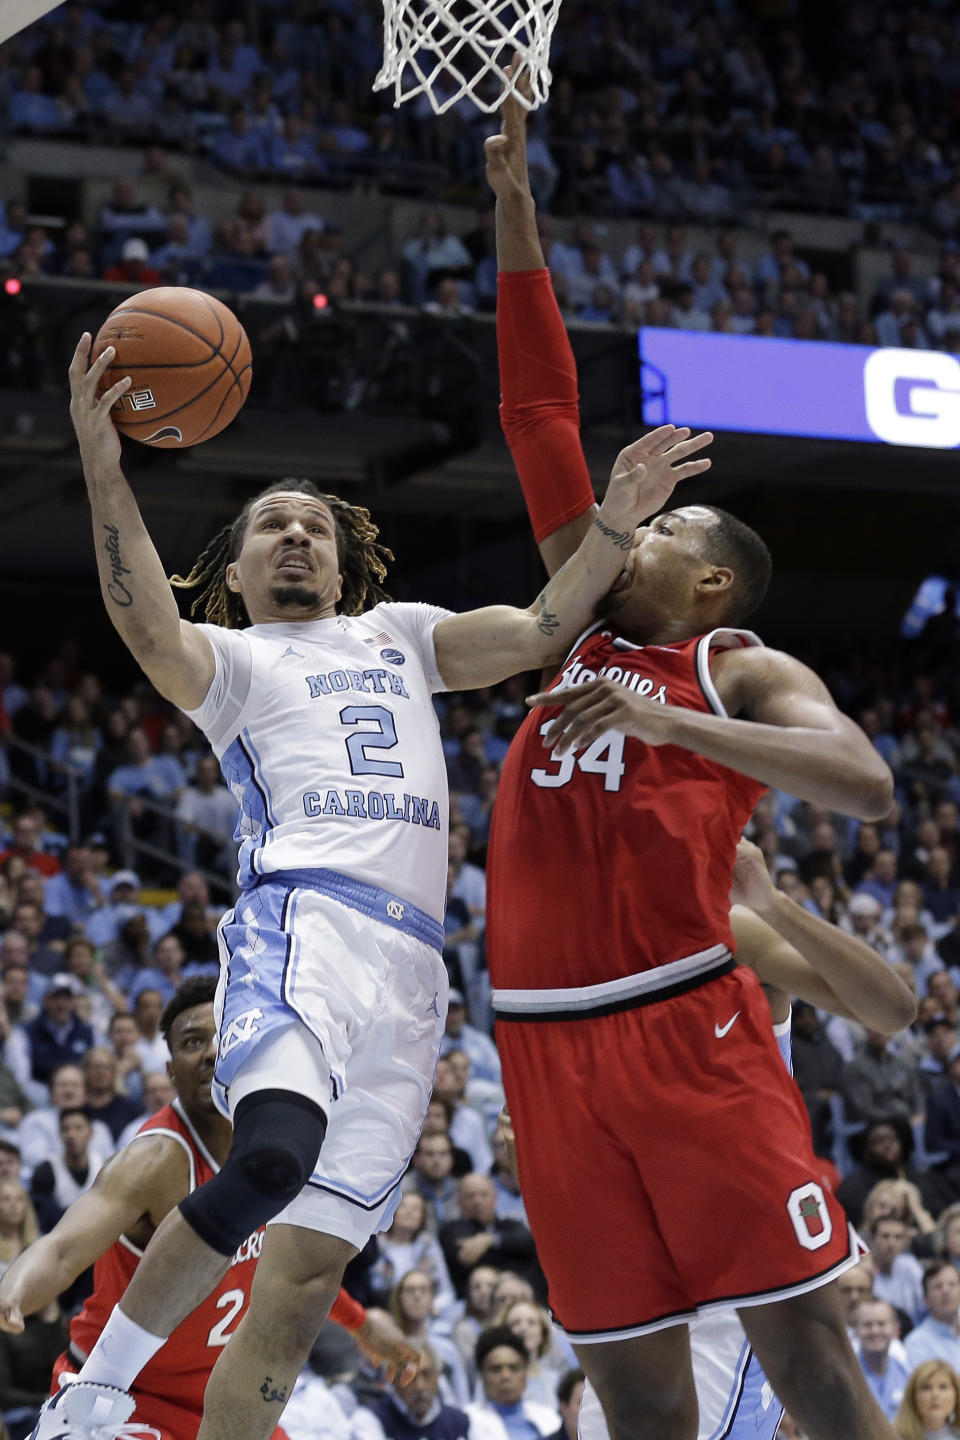 North Carolina guard Cole Anthony (2) drives to the basket against Ohio State forward Kaleb Wesson (34) during the first half of an NCAA college basketball game in Chapel Hill, N.C., Wednesday, Dec. 4, 2019. (AP Photo/Gerry Broome)